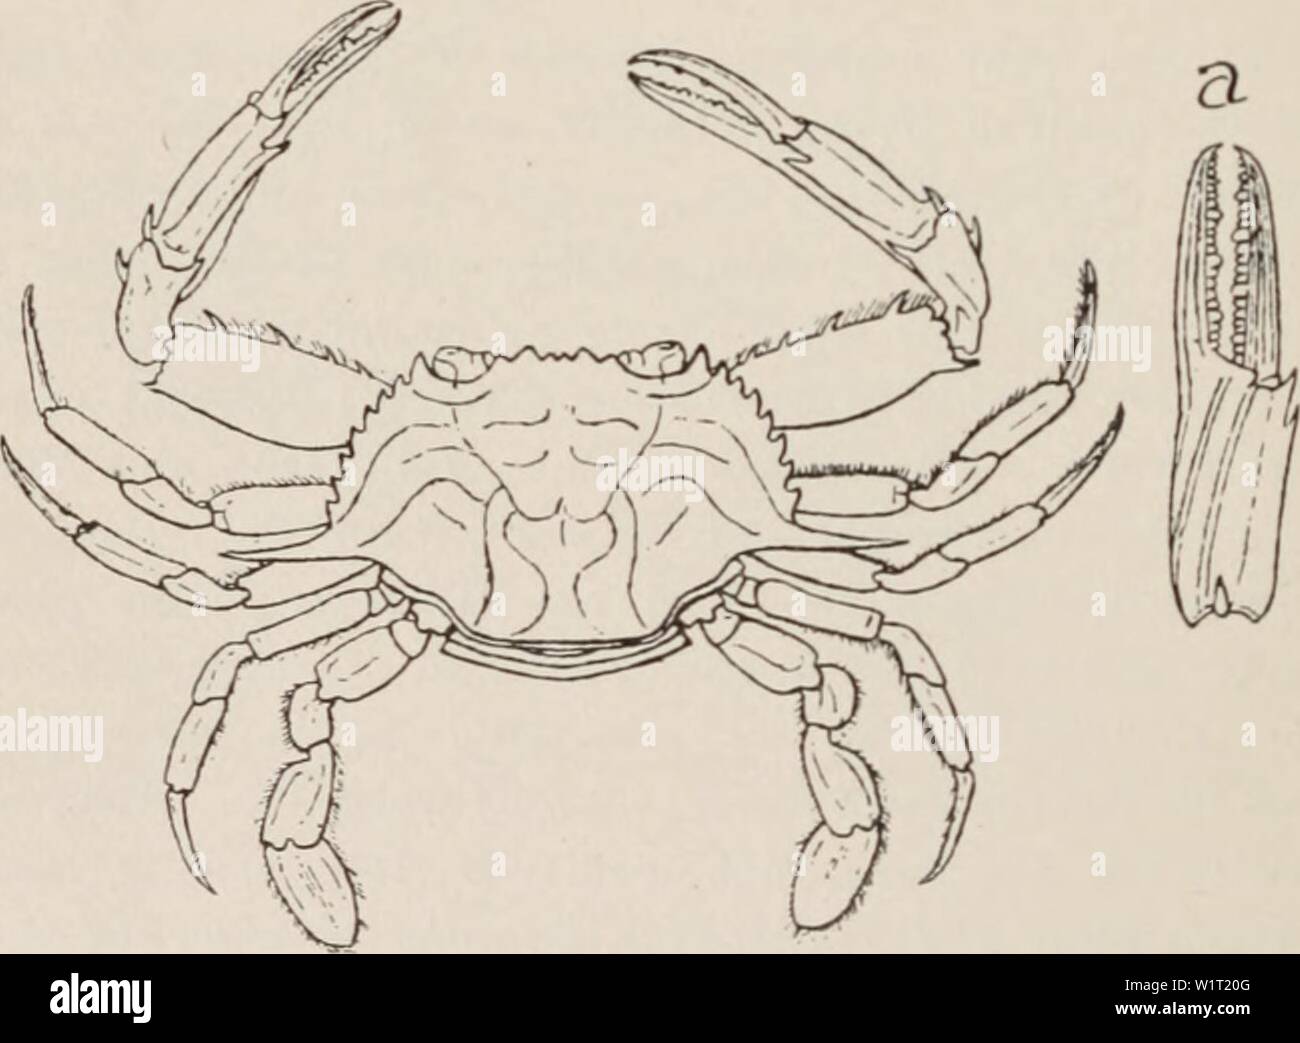 Archive image from page 87 of Decapod crustacea of Bermuda (1908-1922). Decapod crustacea of Bermuda  decapodcrustacea00verr Year: 1908-1922 A. E. Verrill — Decapod Crustacea of l'»-nnulmi&lt;l:int the Gulf Stream to Florida, Cuba, :in«l tin- Gulf of .M«-ii-.,. l-'rv of the Bermuda s|.L-rinit-ns i-an-ird eggs; ni'-t arc &lt;|iiitr yOUDg. Achelous anceps (Sans.) Stimpson. L,I/,,;I (/-M-C//.S Saussure, Crust. Antilles. M«-x.. M.-m. S.»-. I'liys. Hist. Nat.. Geneve, xiv. p. J:U |1S|, pi. ii. tig. 11-11'-, l.V.s «'ul,a). Neptunua anceps A. AI.-K&lt;lv.. Ar. LM3, 1879. RauUin. Aim. N. York A.-.- Stock Photo